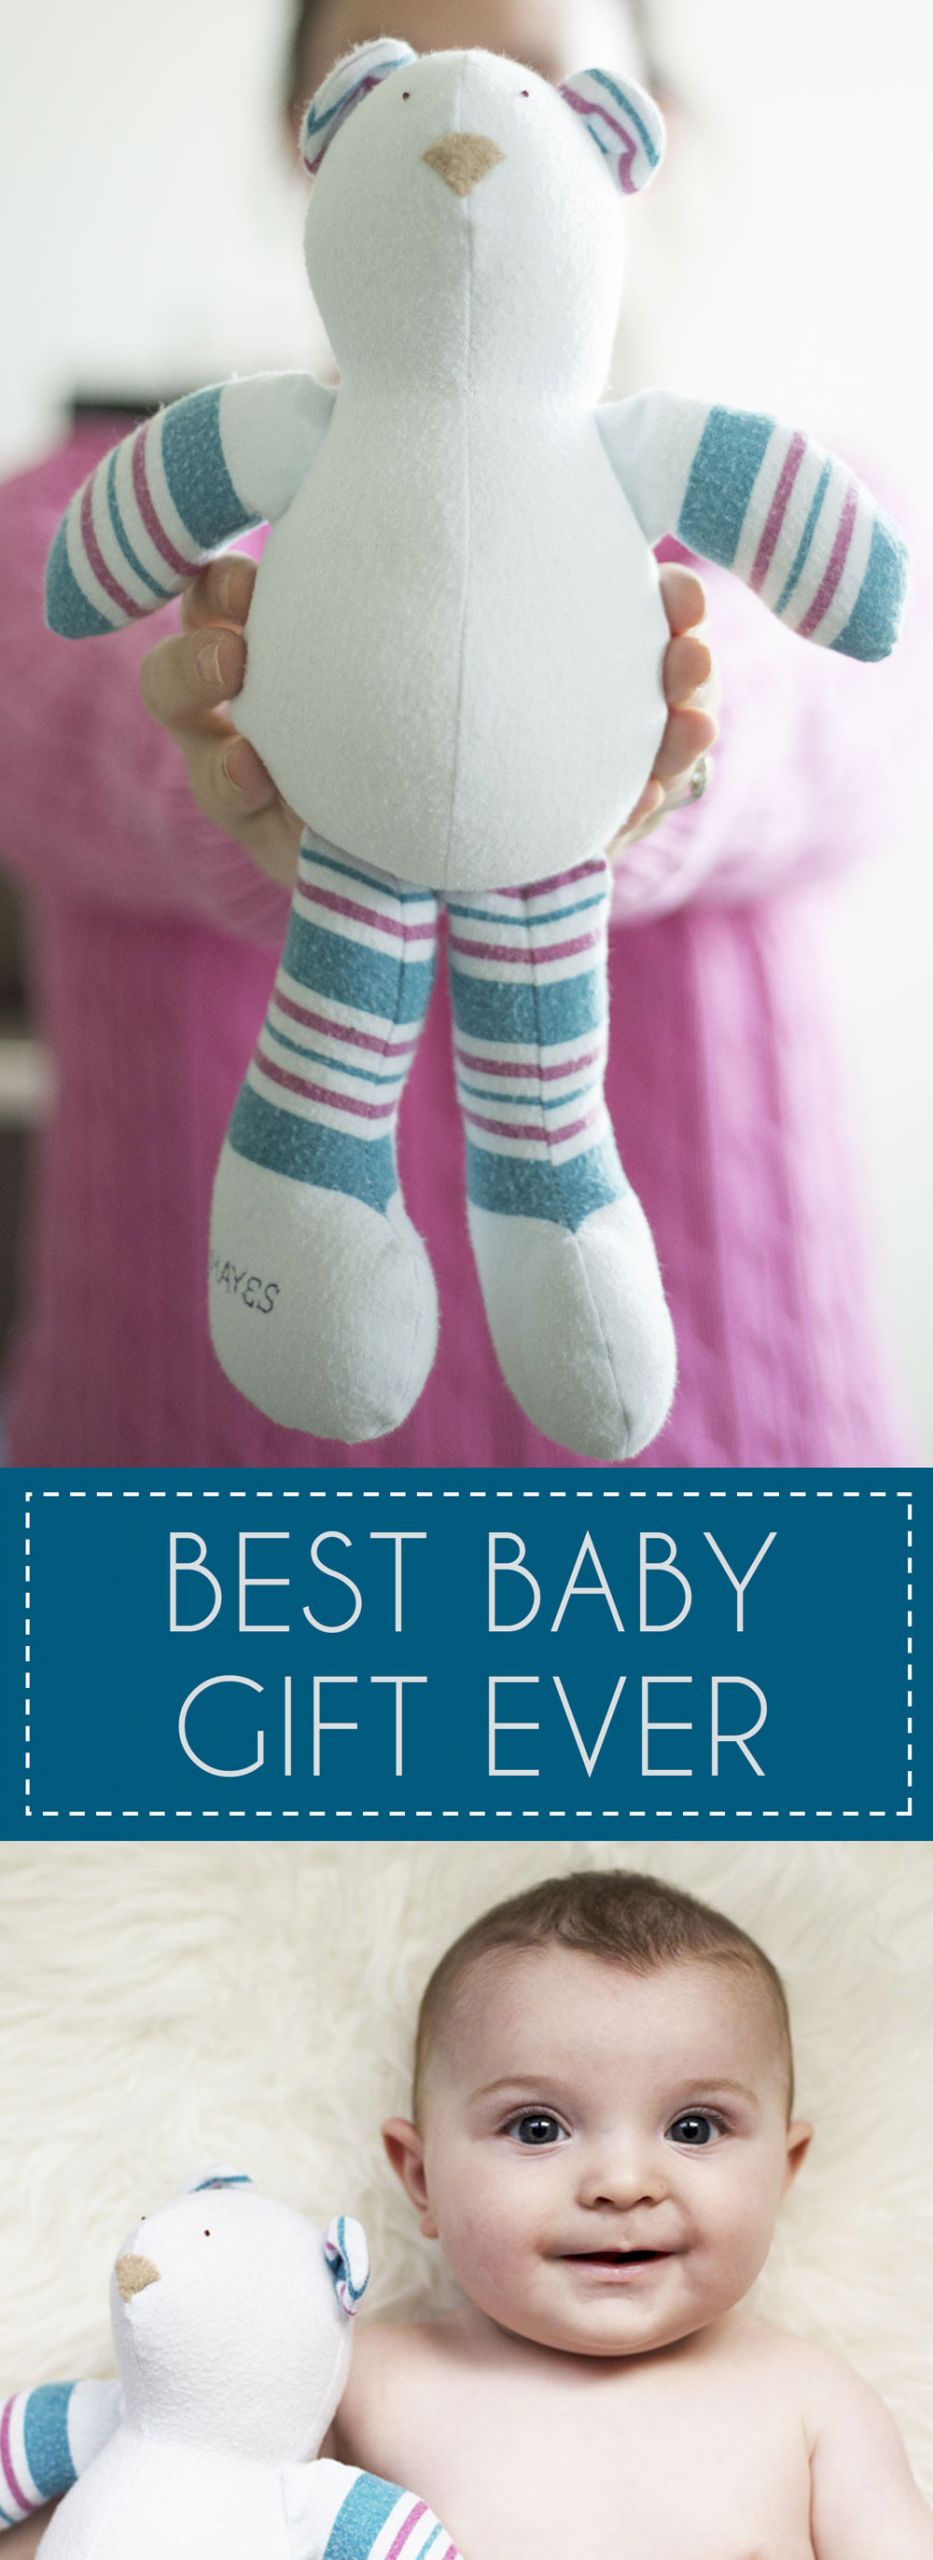 Coolest Baby Gifts 2015
 Best Baby Gift Ever Mikaela J Designs